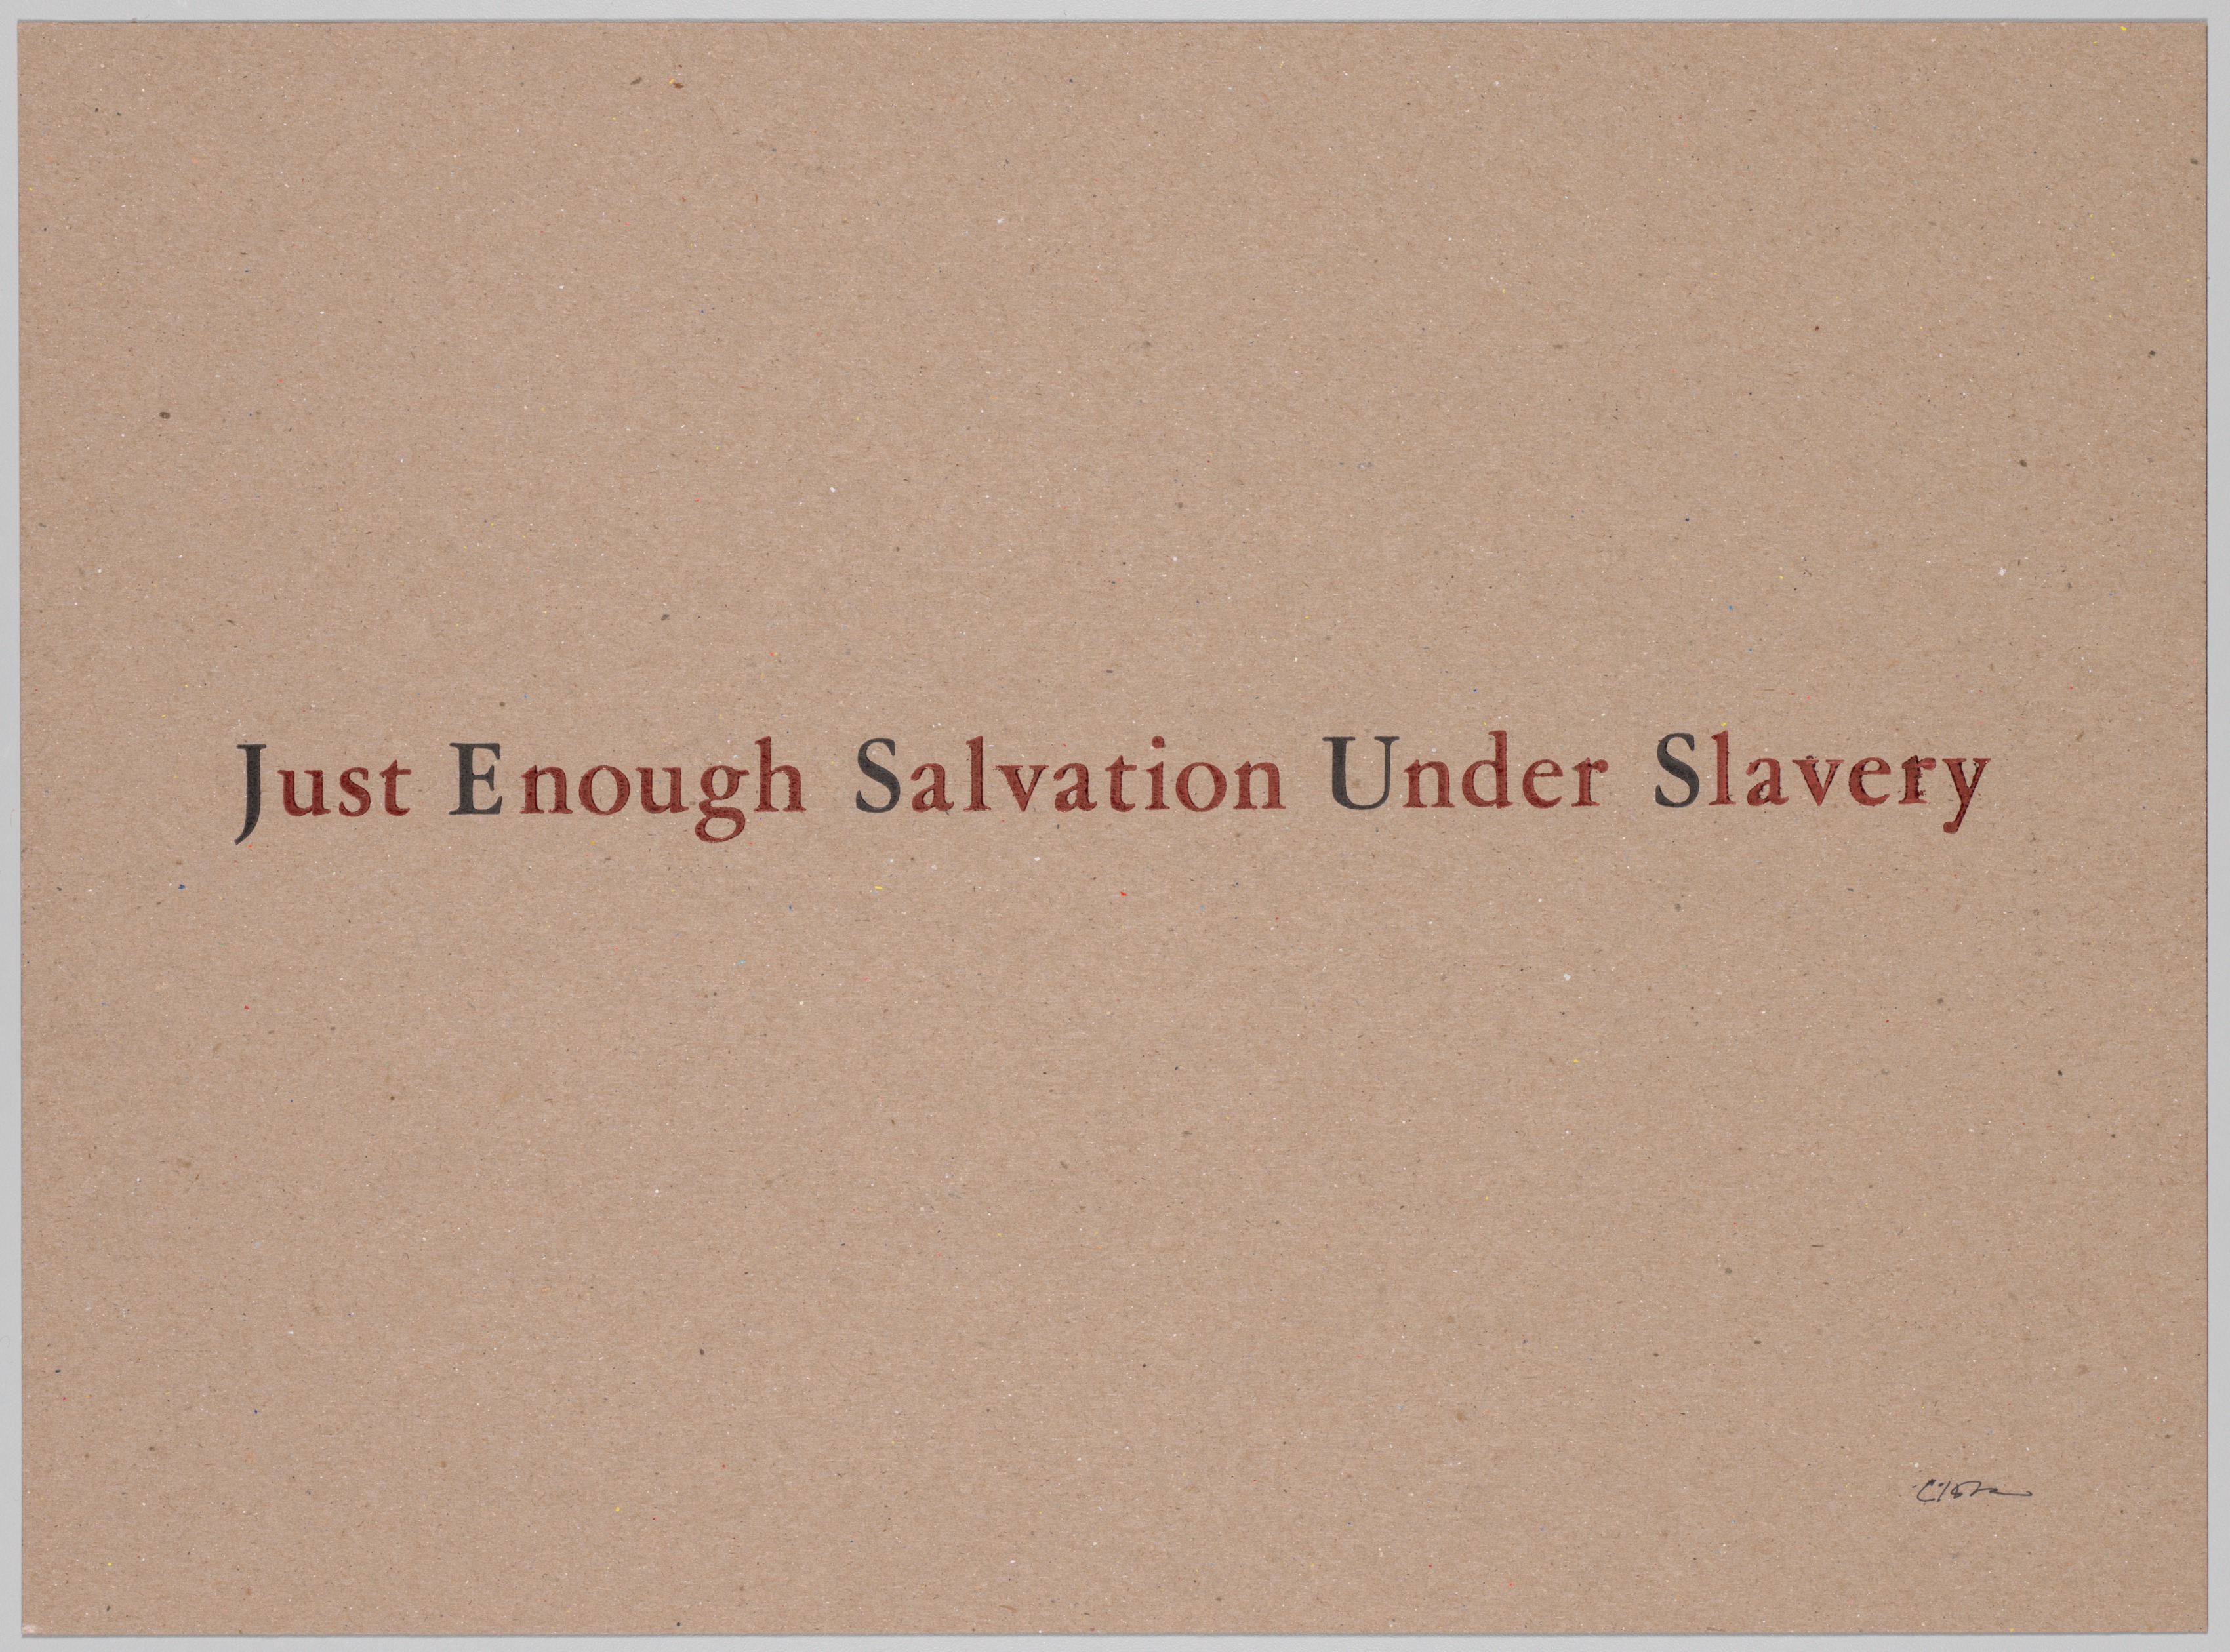 The Bad Air Smelled of Roses: Just Enough Salvation Under Slavery